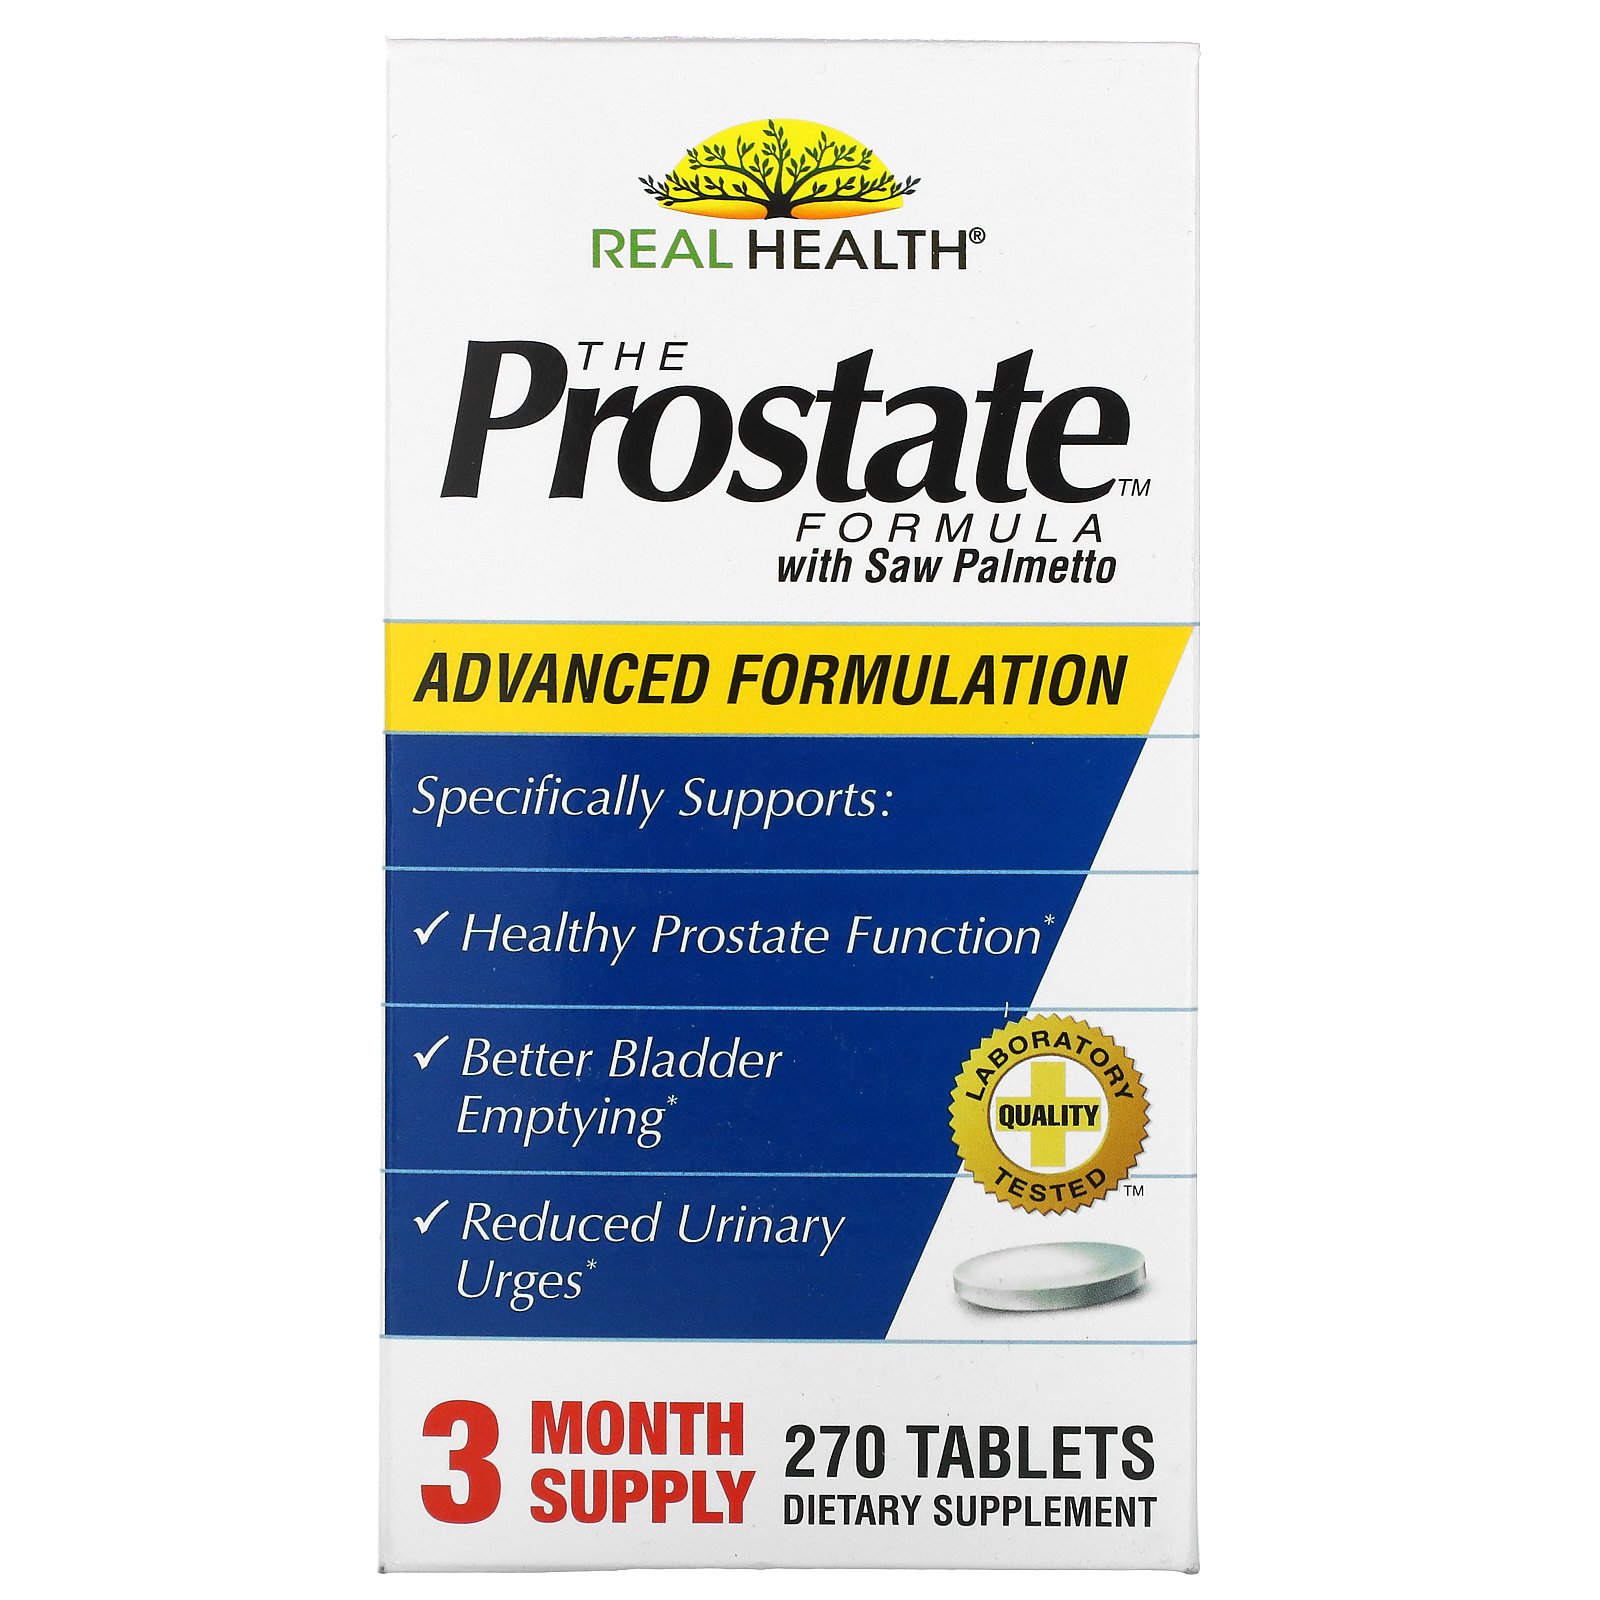 healthy prostate function)